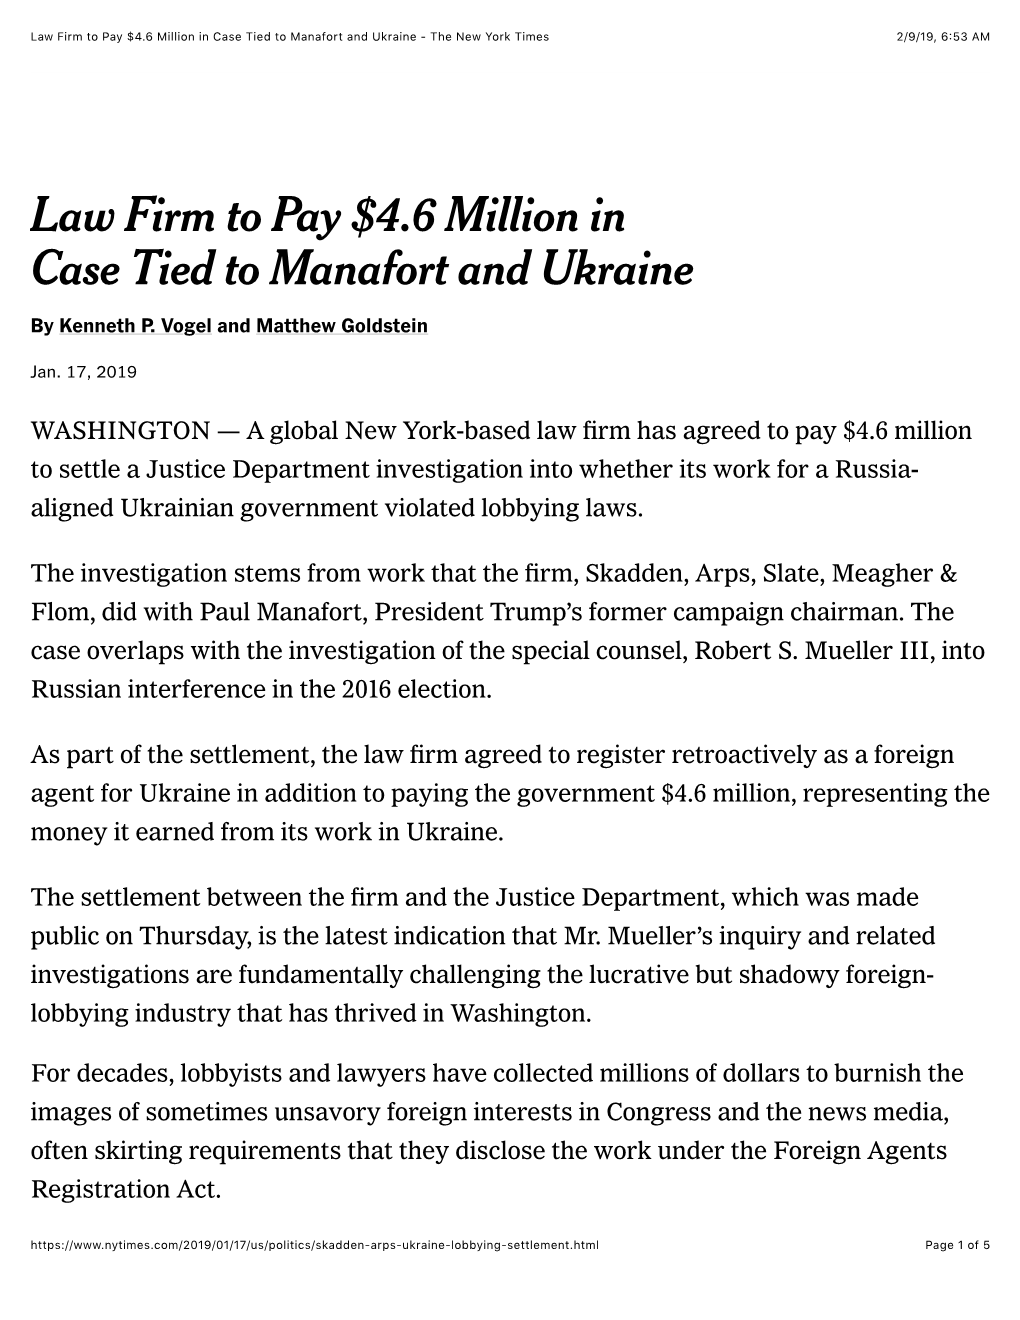 Law Firm to Pay $4.6 Million in Case Tied to Manafort and Ukraine - the New York Times 2/9/19, 6�53 AM